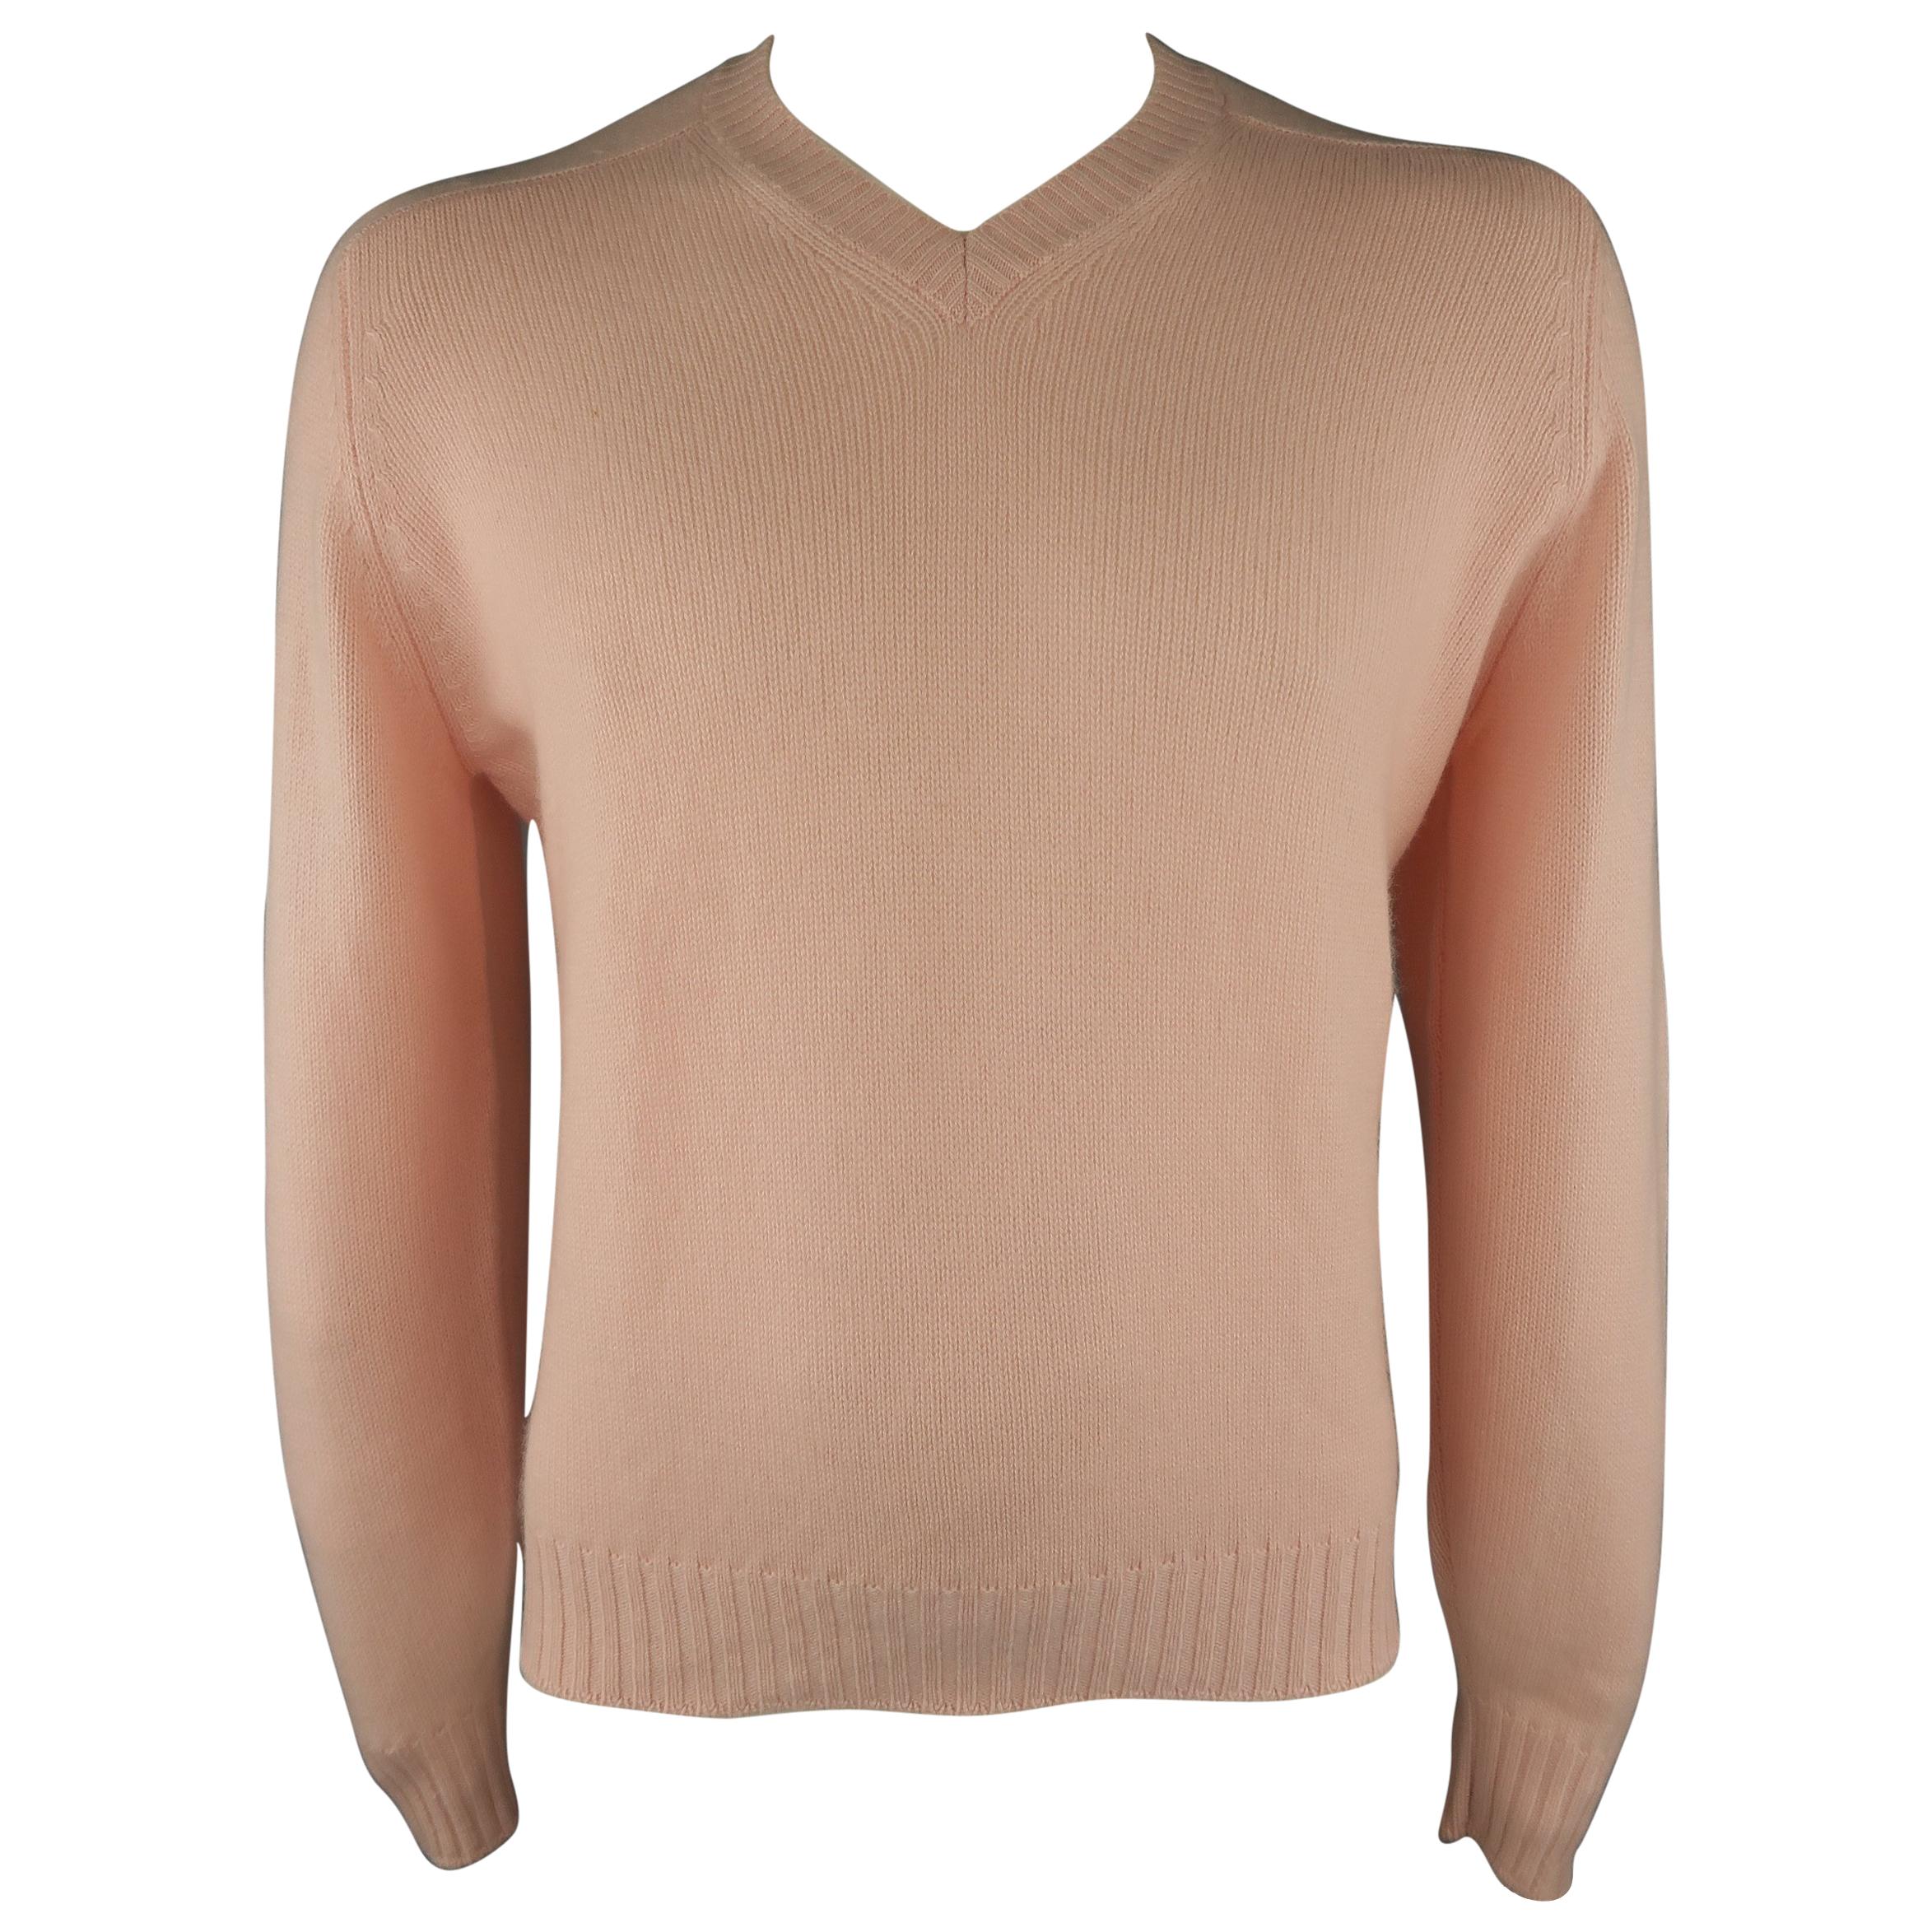 BRUNELLO CUCINELLI Size 40 Light Pink Knitted Cashmere Sweater